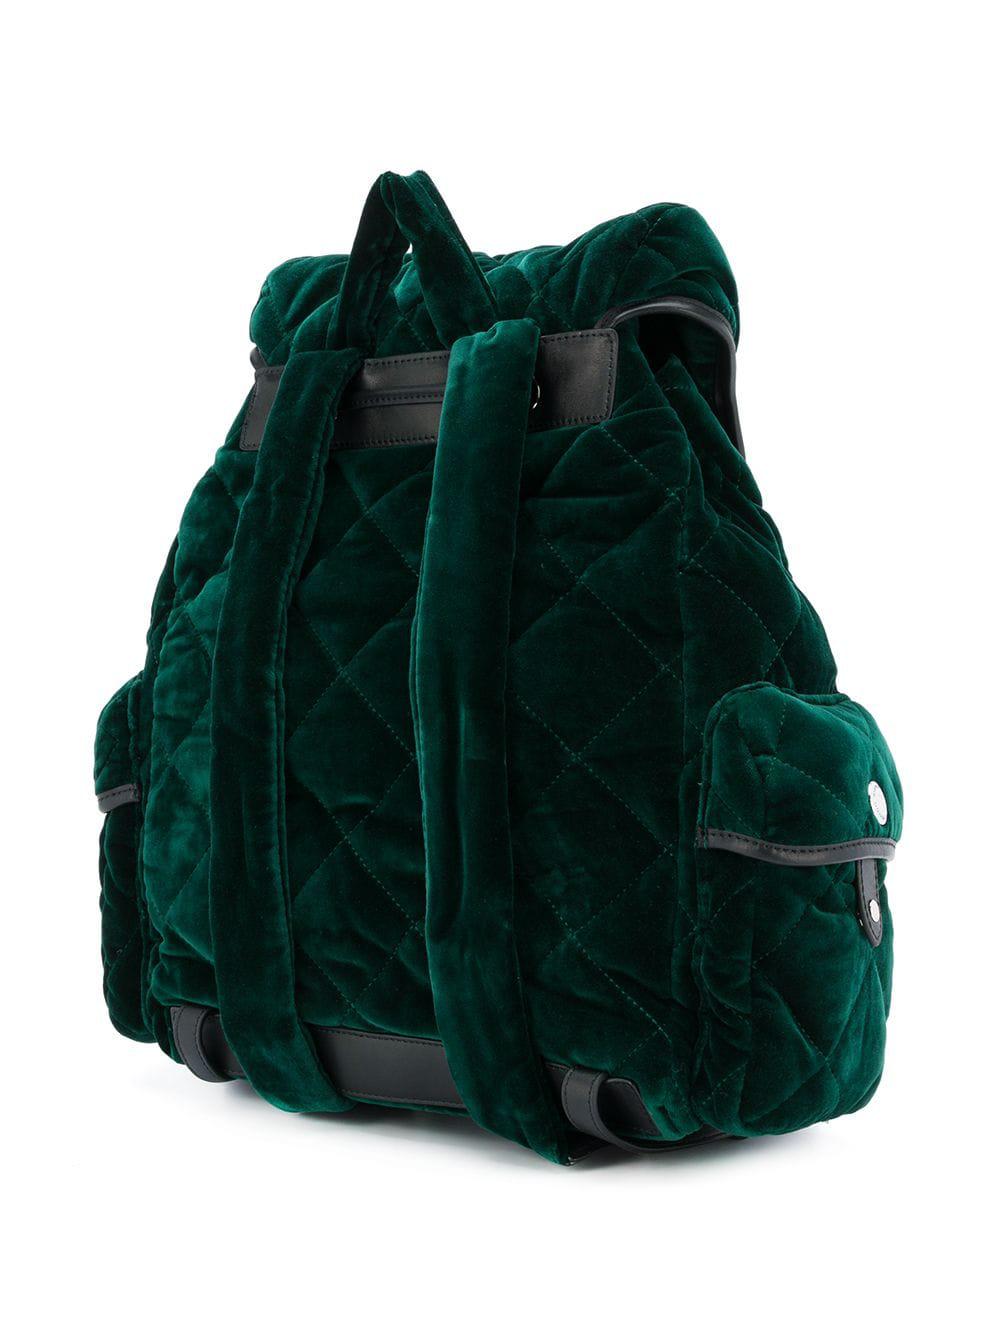 Sonia Rykiel Leather Le Oyster Quilted Backpack in Green - Lyst